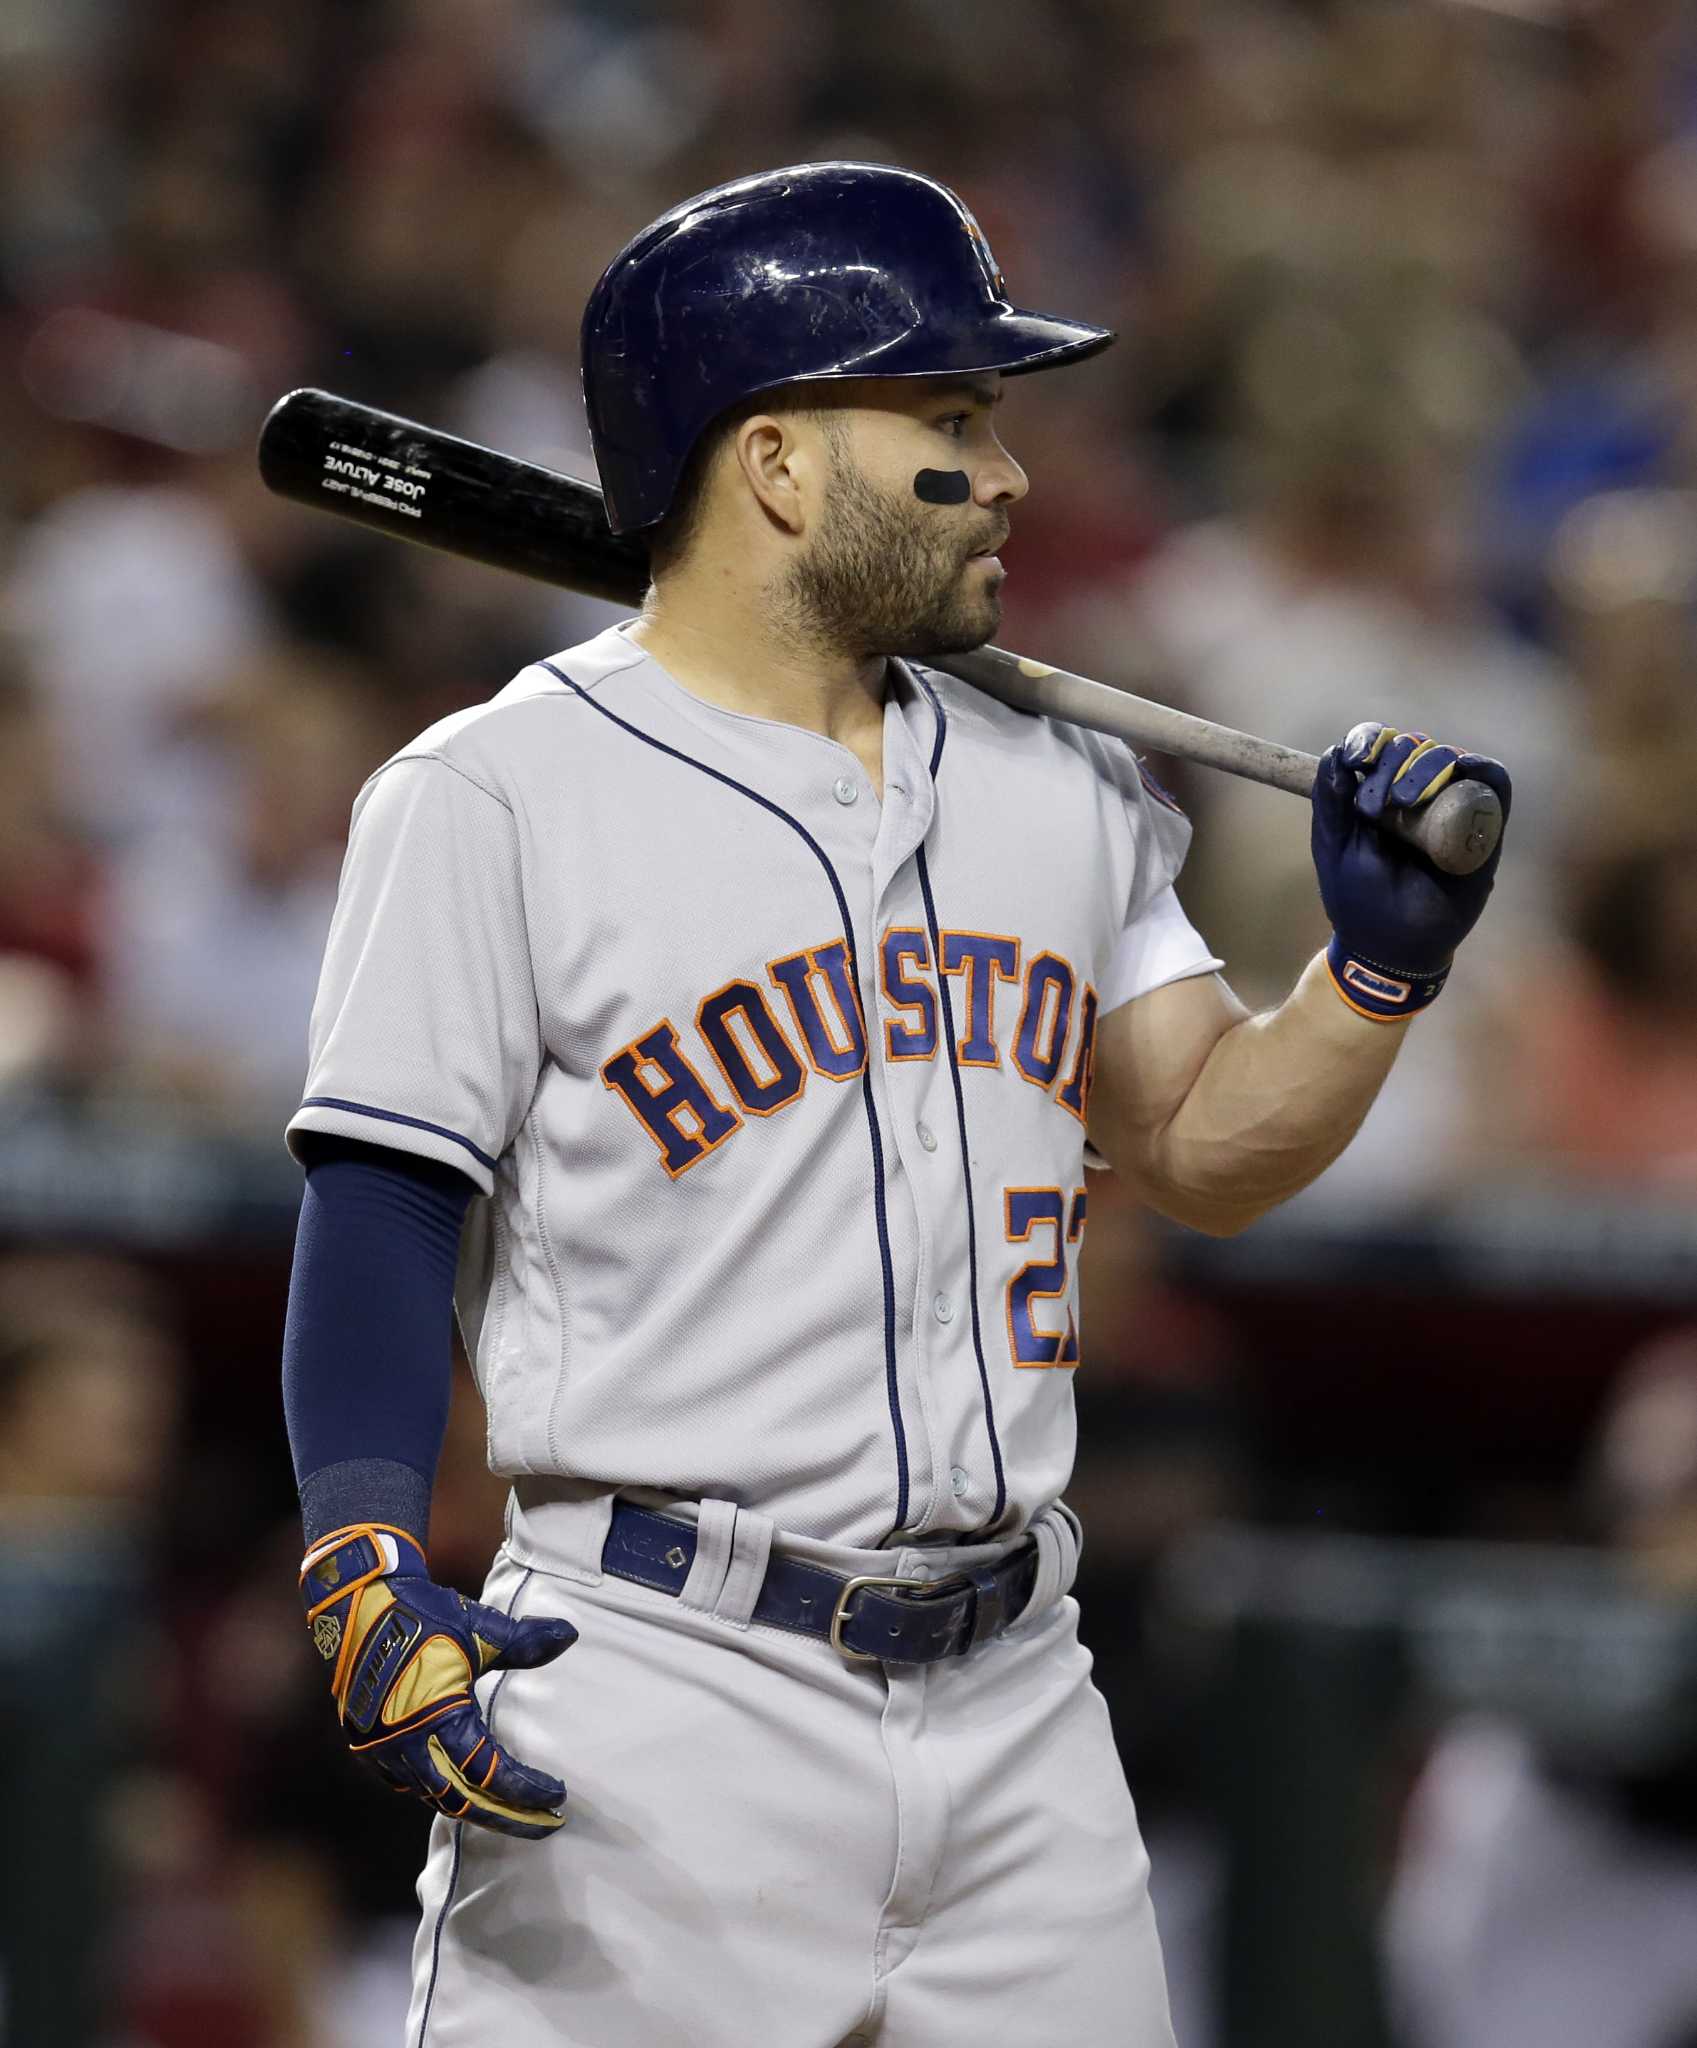 Jose Altuve's chase for 3,000 hits: Can Astros star join elite club?